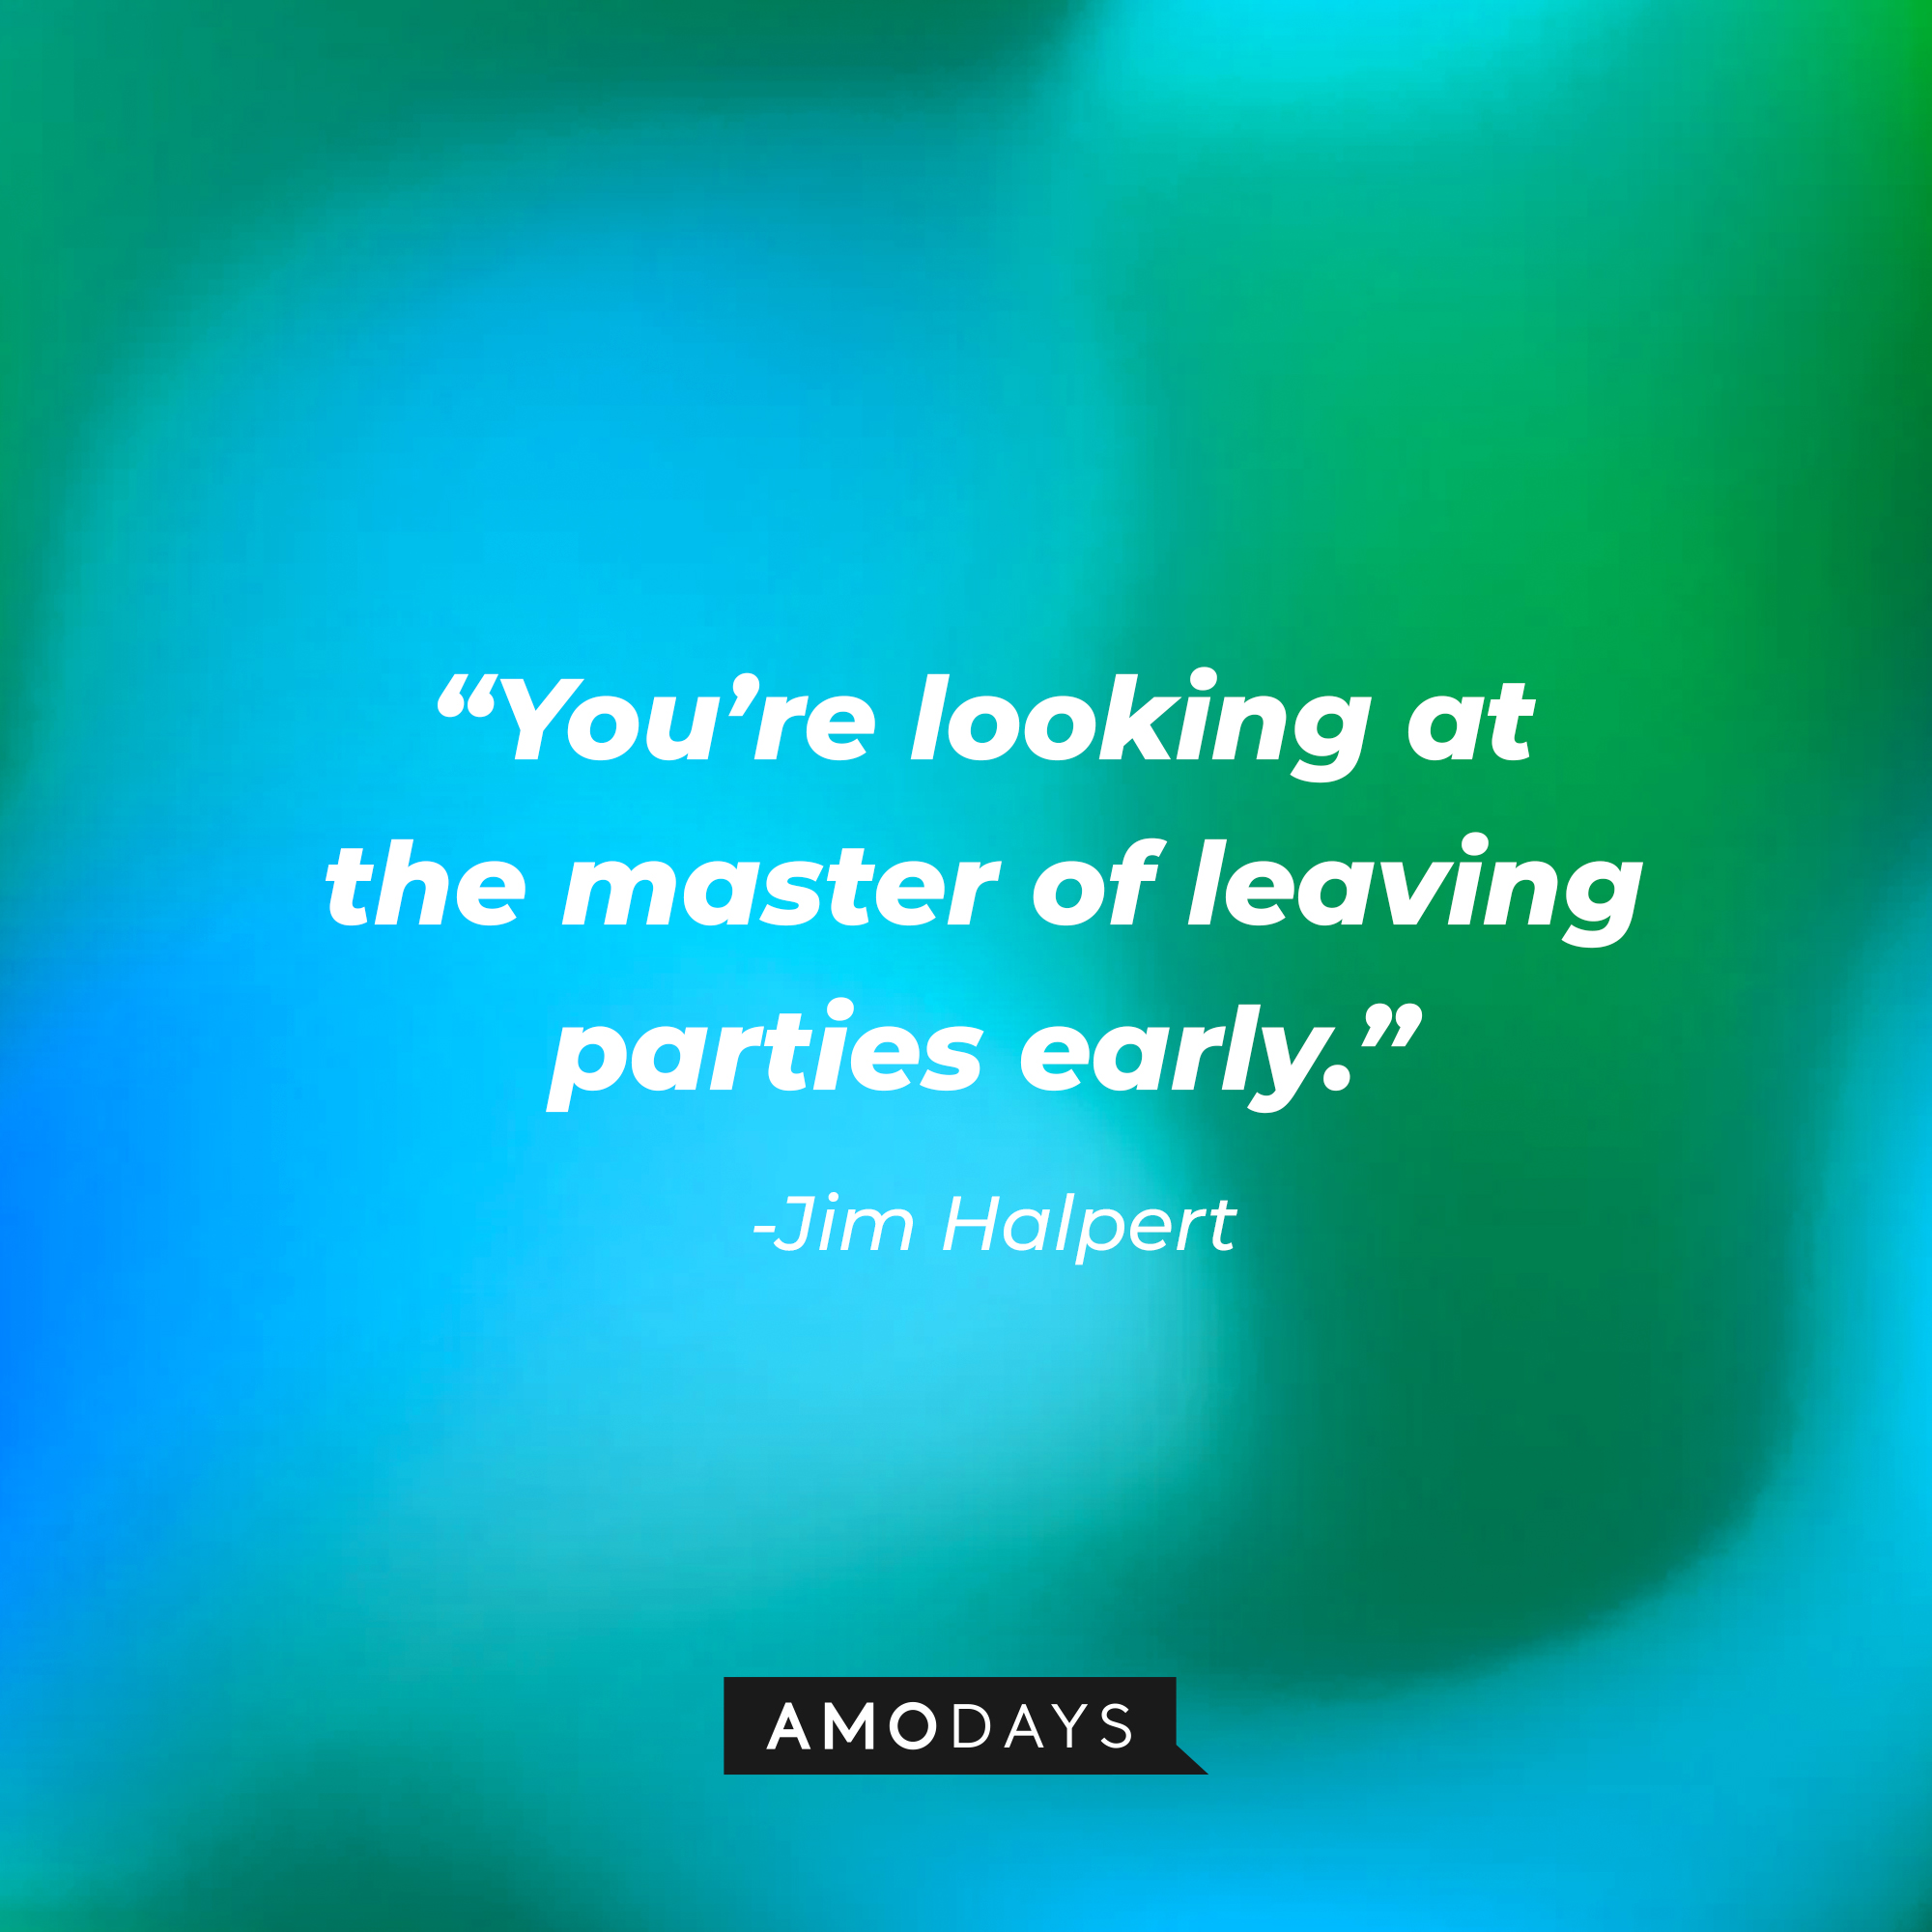 Jim Halpert’s quote: "You’re looking at the master of leaving parties early.” | Source: AmoDays